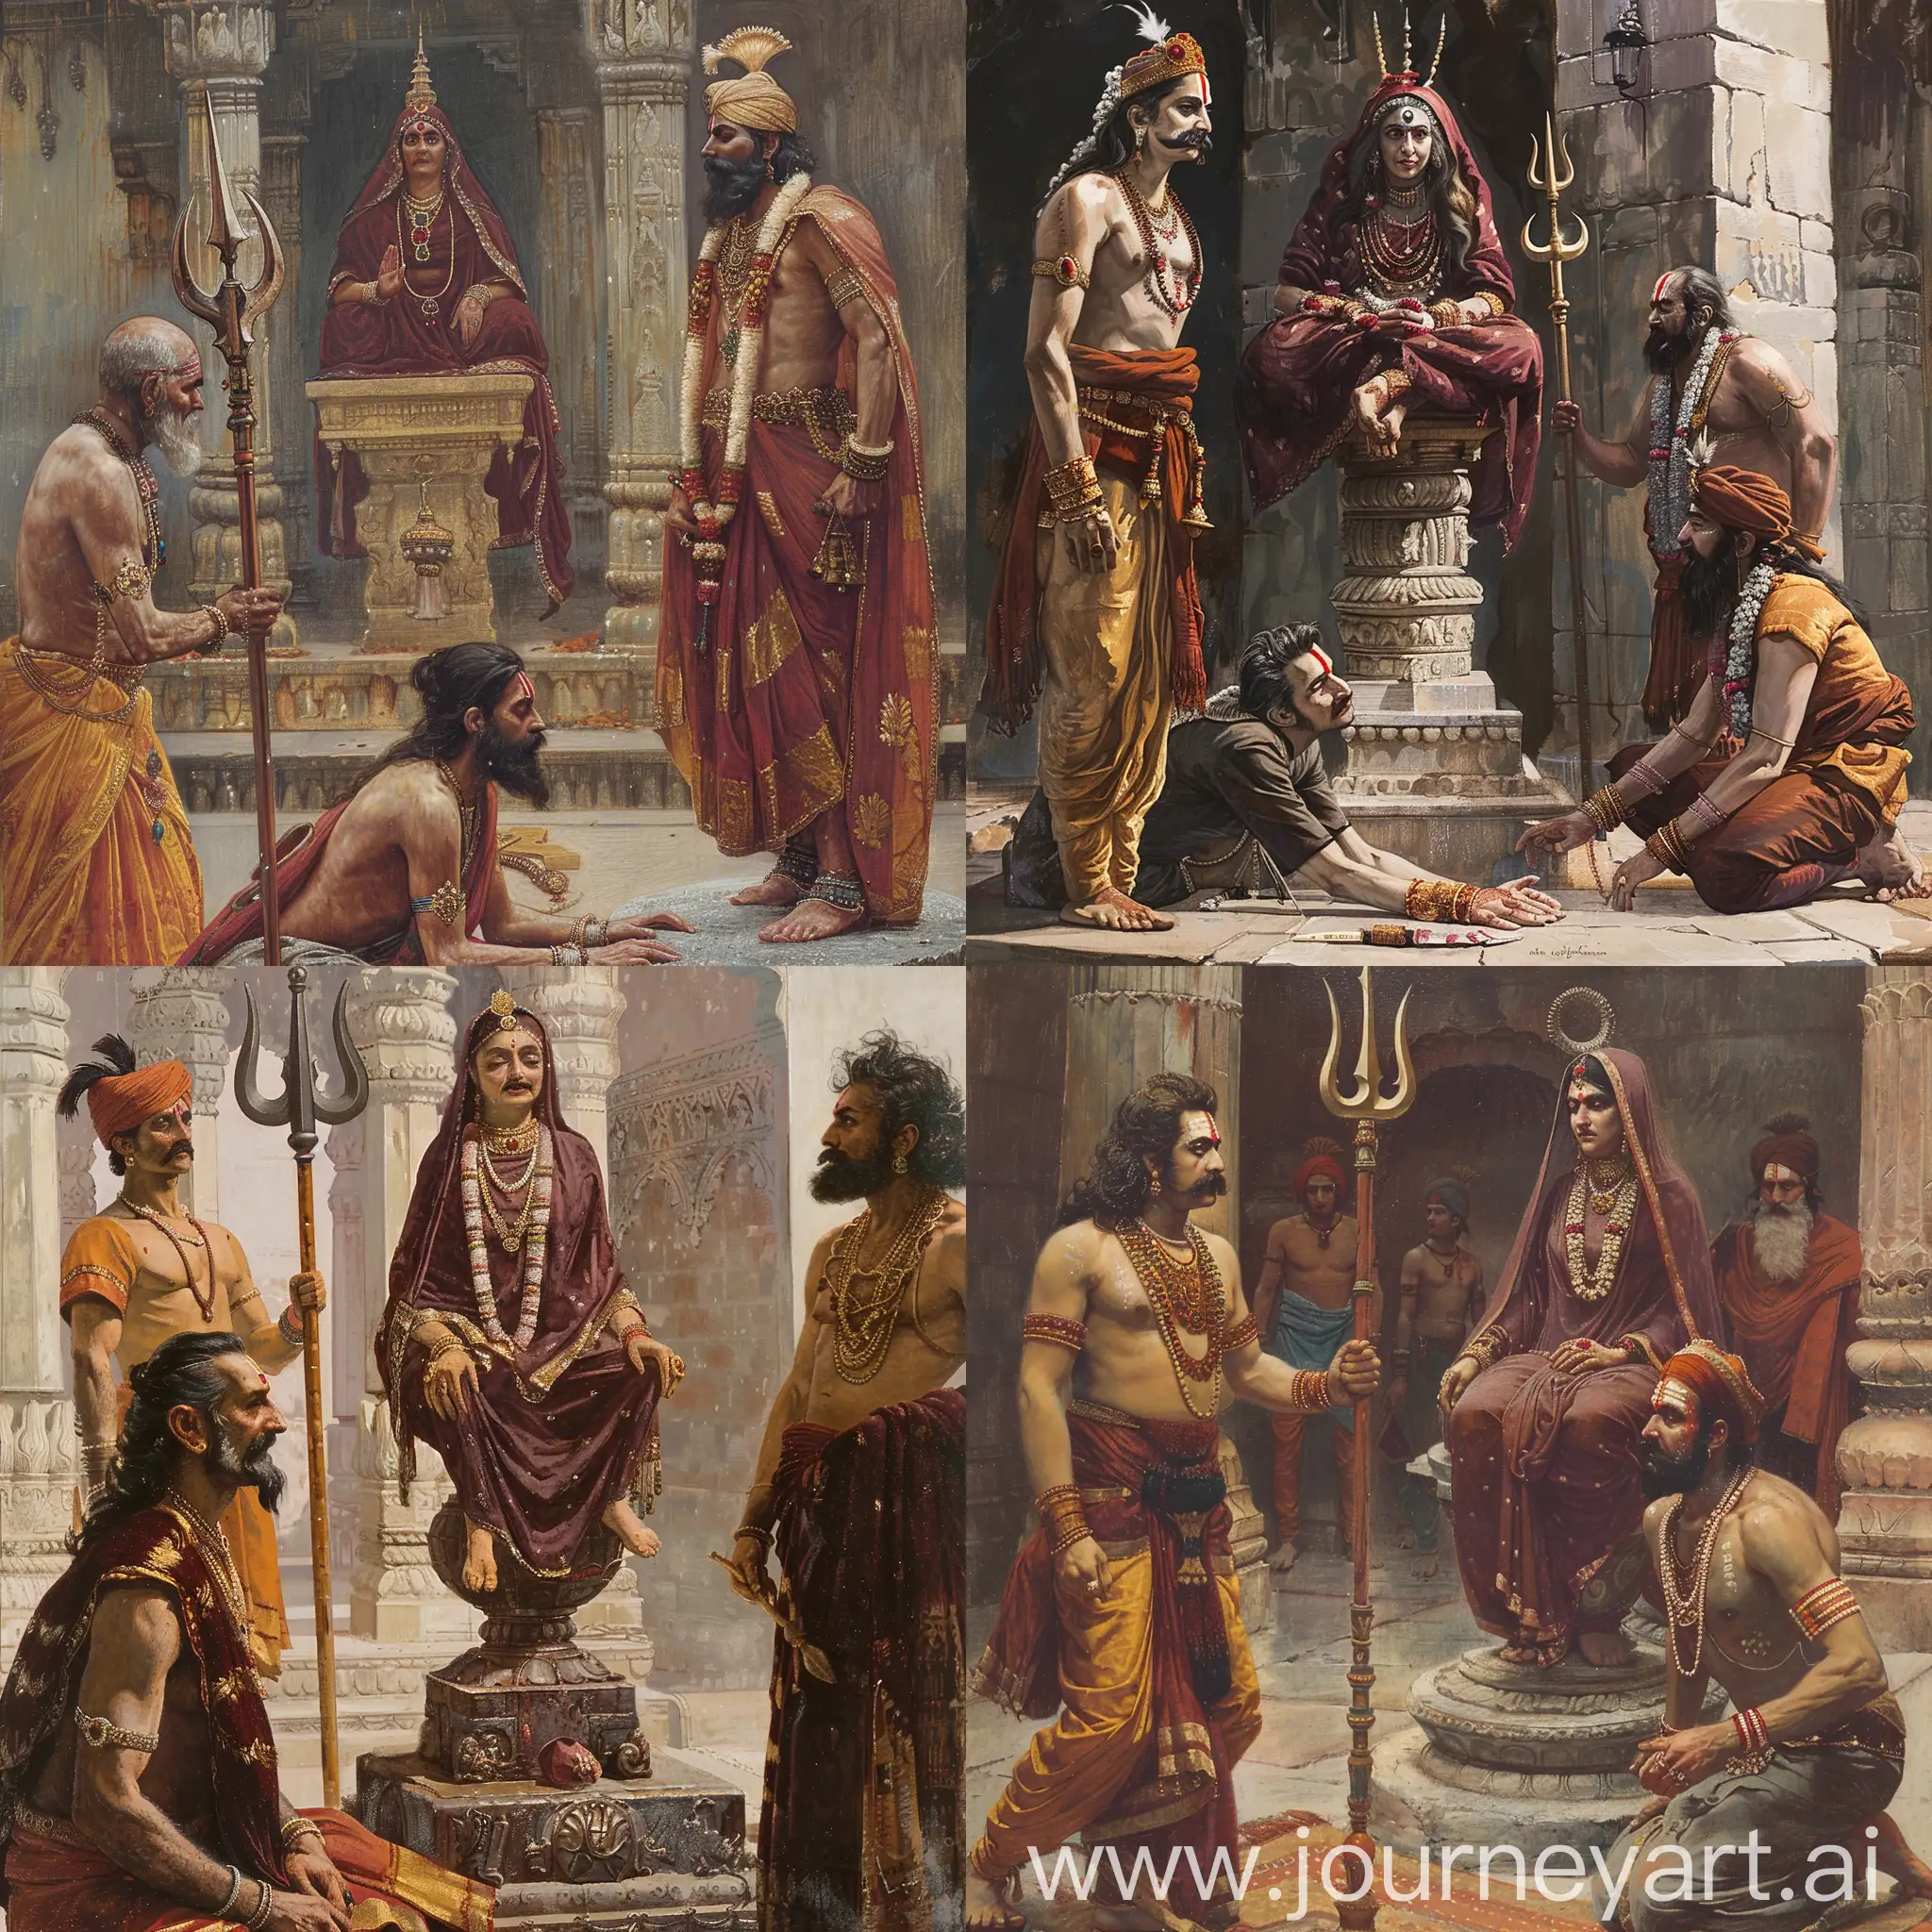 Rajput king who is young with a moustache is bowing down in front of an Indian lady saint who is wearing a maroon robe head covered sitting on a pedestal with a trident in her hand. Another rajput chieftain with a beard is standing on the side watching the king and the saint.